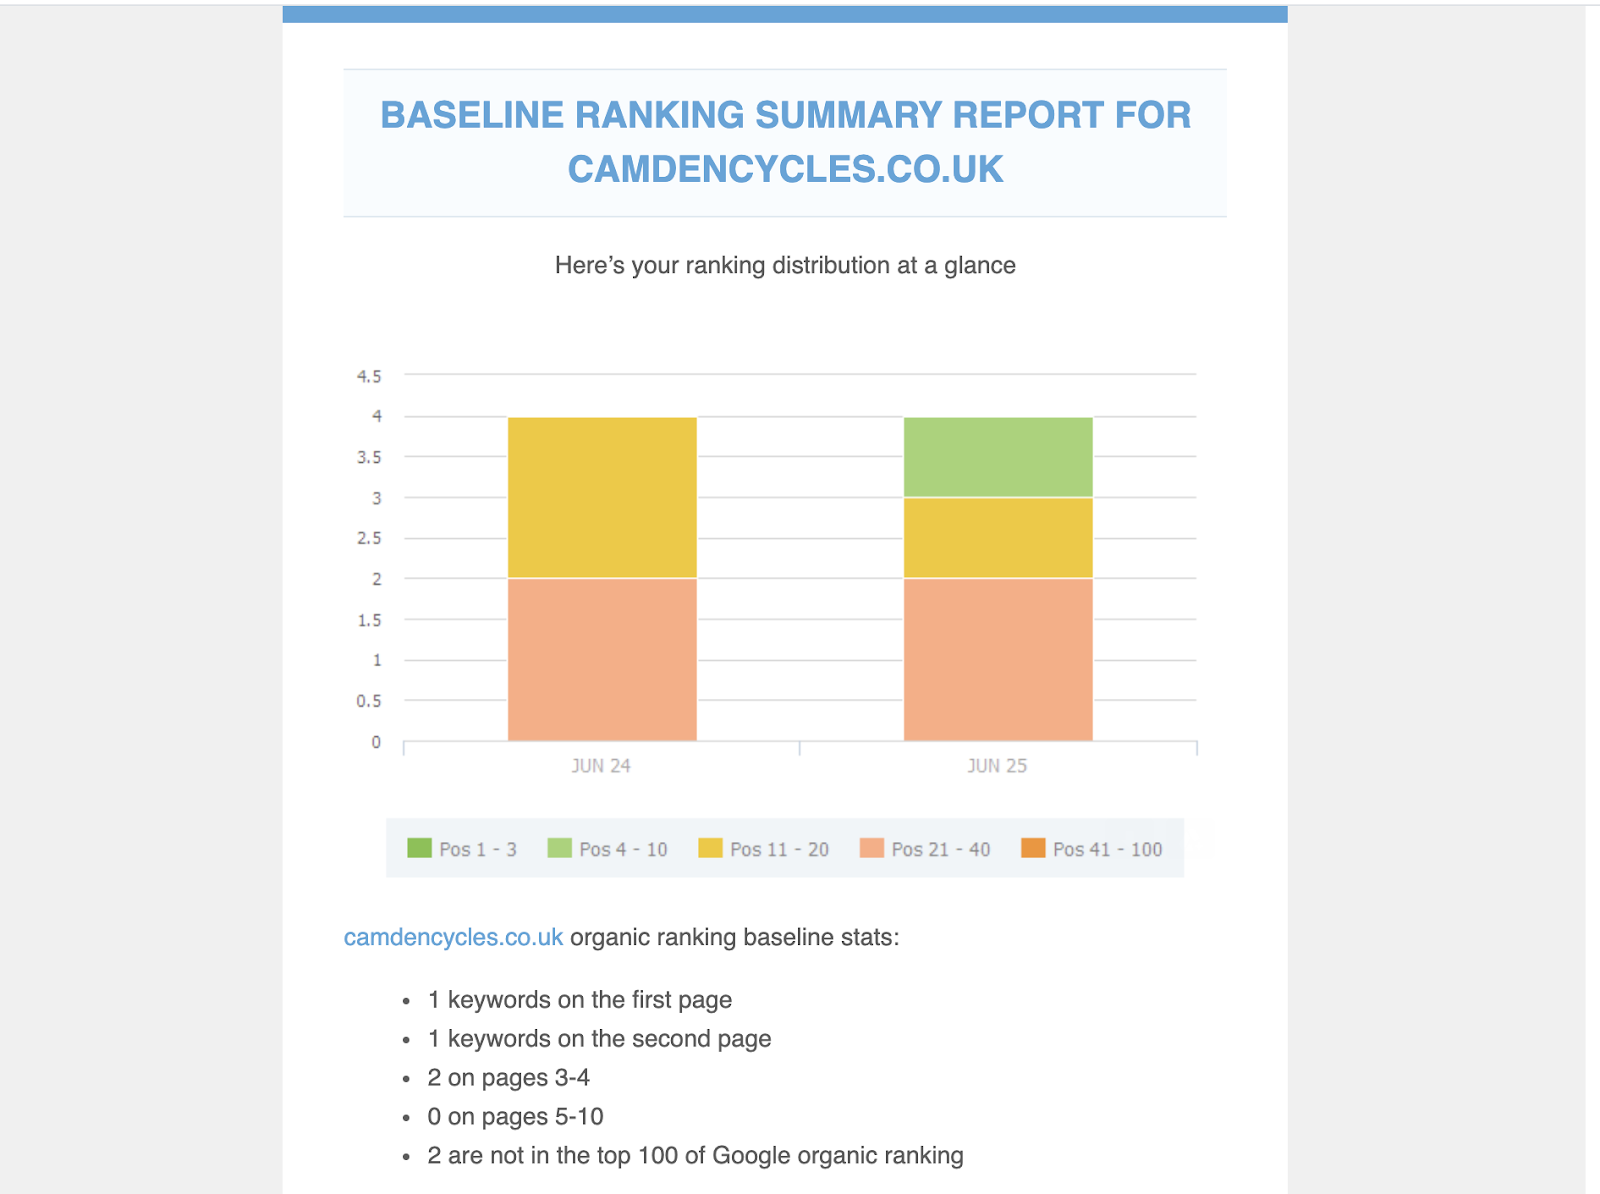 Baseline Ranking Summary Report: your ranking distribution at a glance